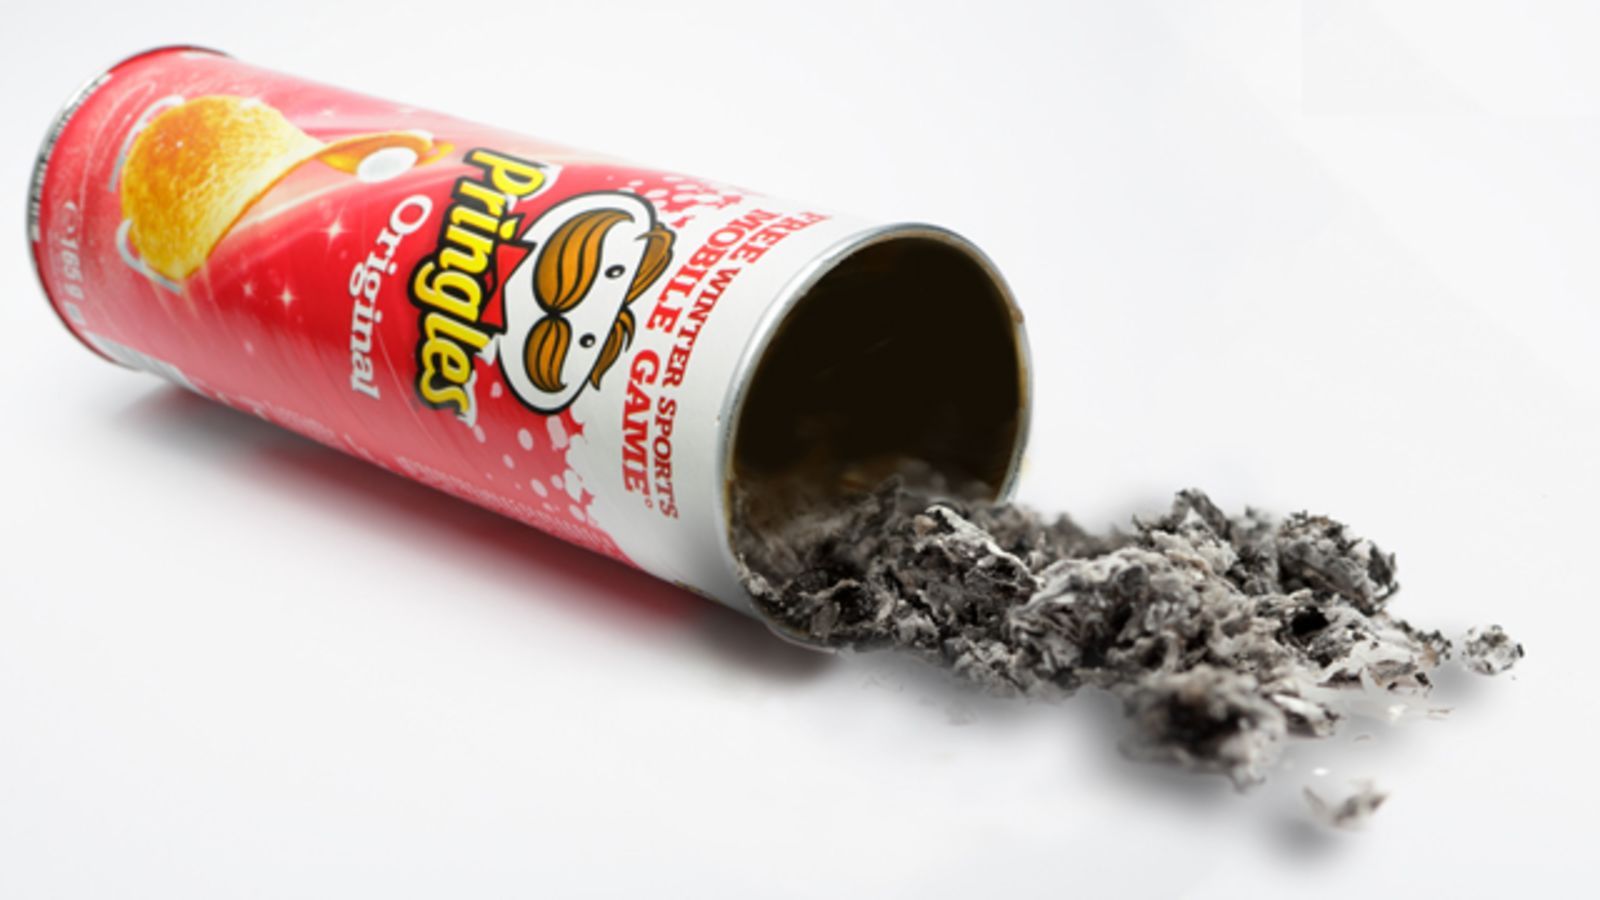 Fredric Baur invented the Pringles can. When he passed away in 2008, his ashes were buried in one.